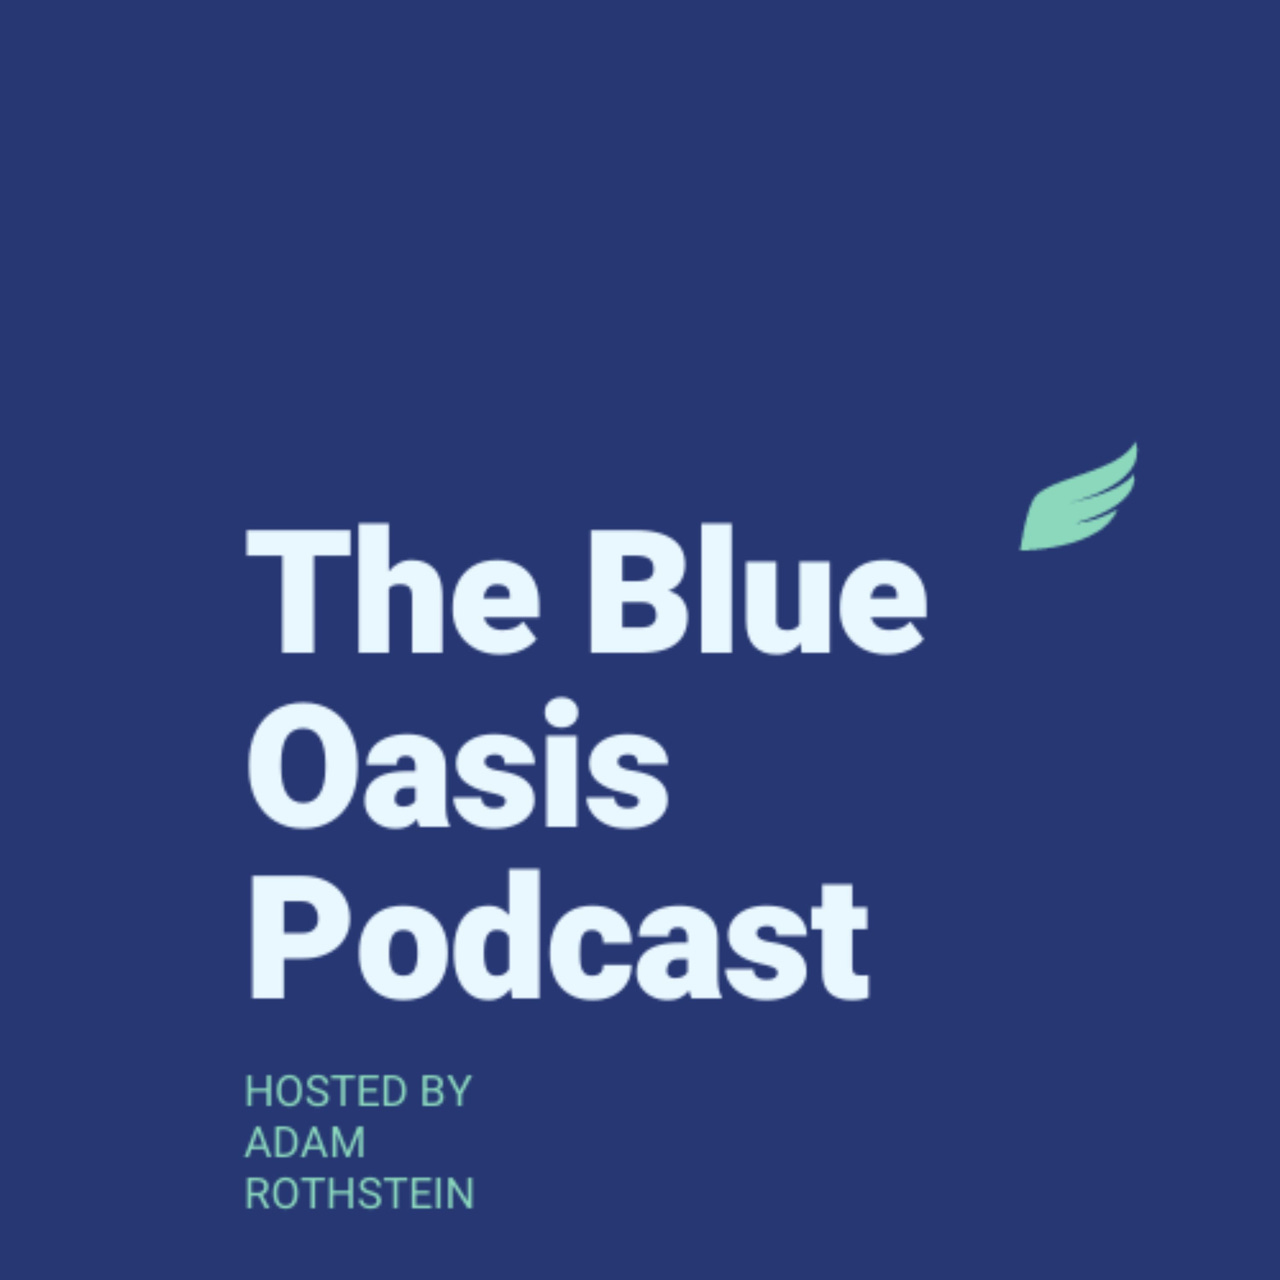 The Blue Oasis Podcast Episode #106: On Horses, Quantum Physics and More Feat. Lucie Ptasznik